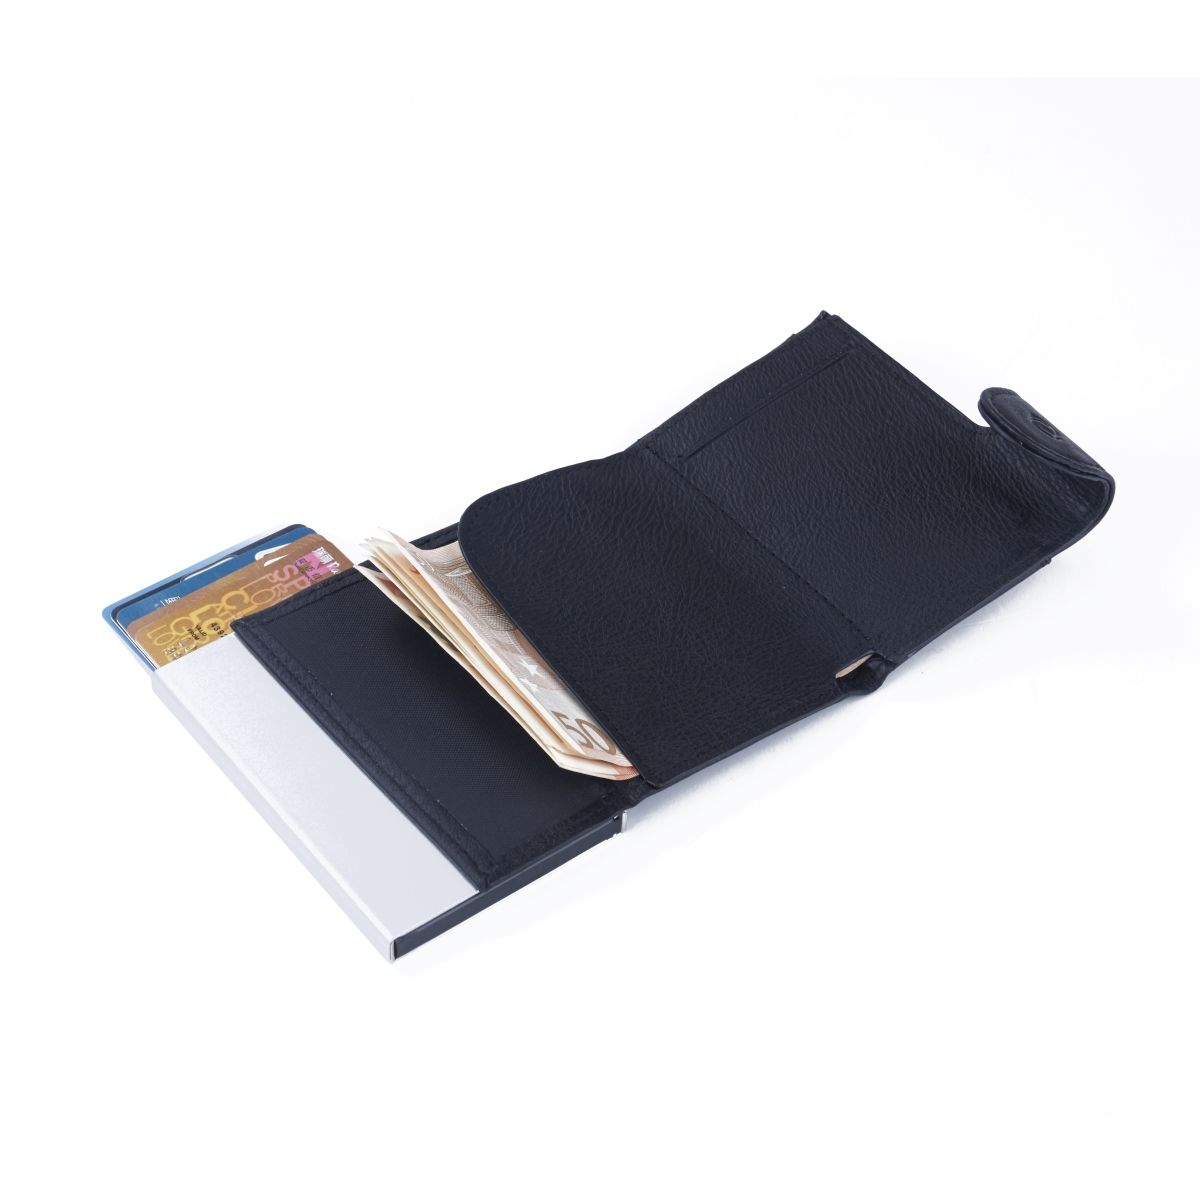 C-Secure Aluminum Card Holder with PU Leather with Coin Pouch Dark Brown